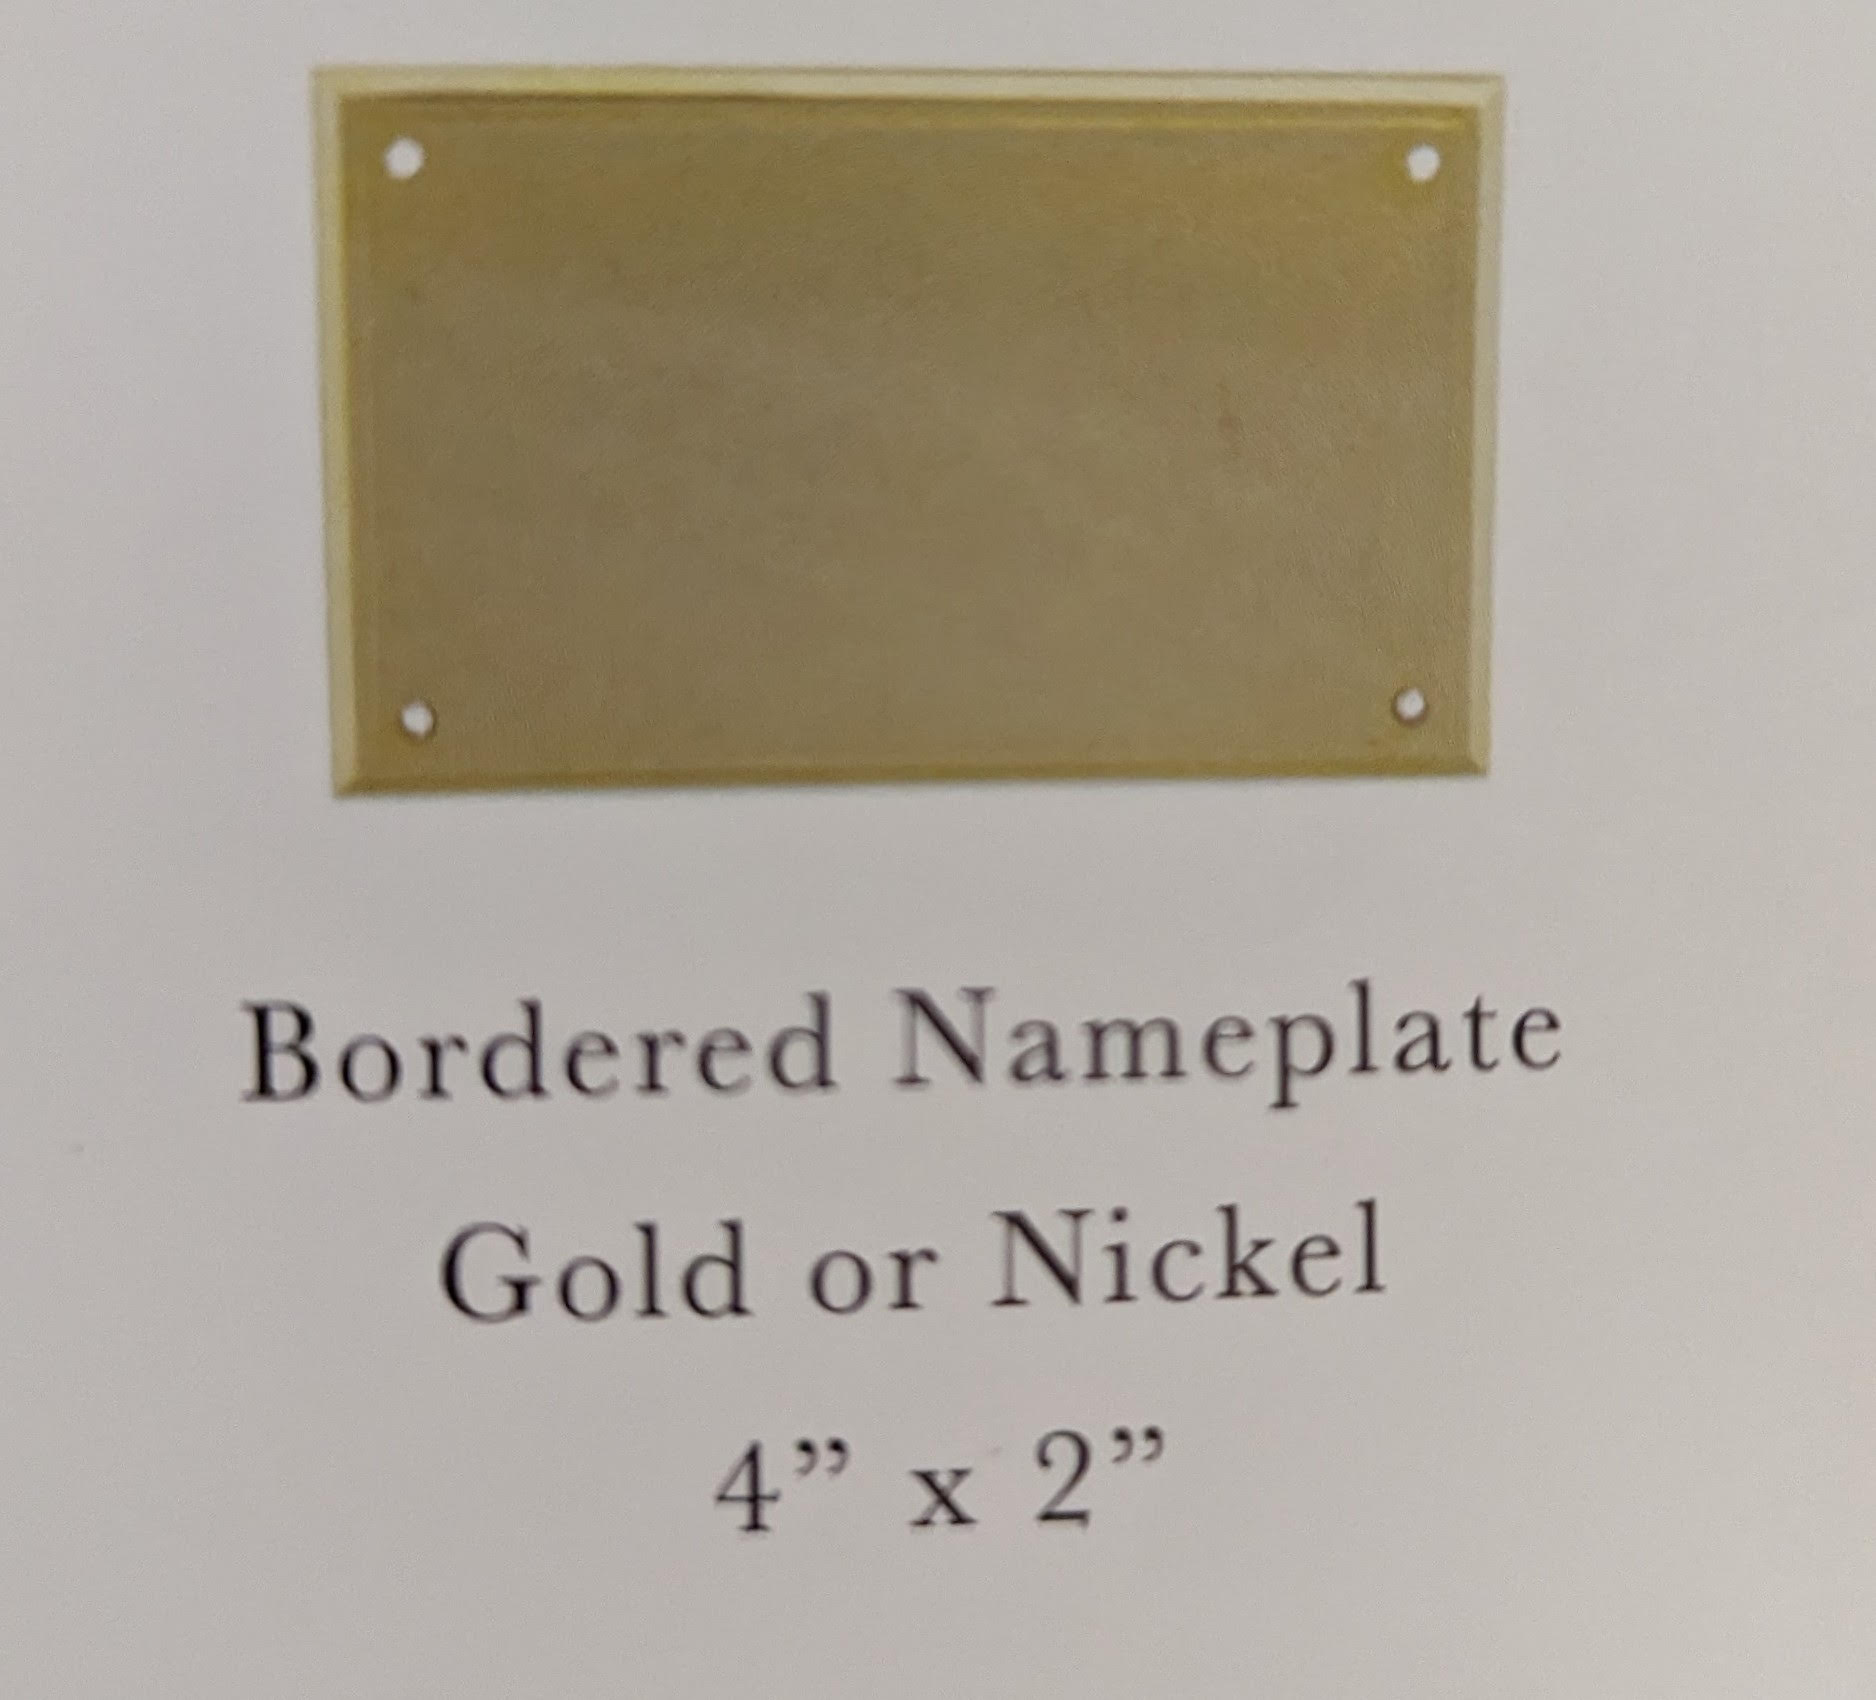 Bordered Nameplate Gold or Nickel 4'' x 2''